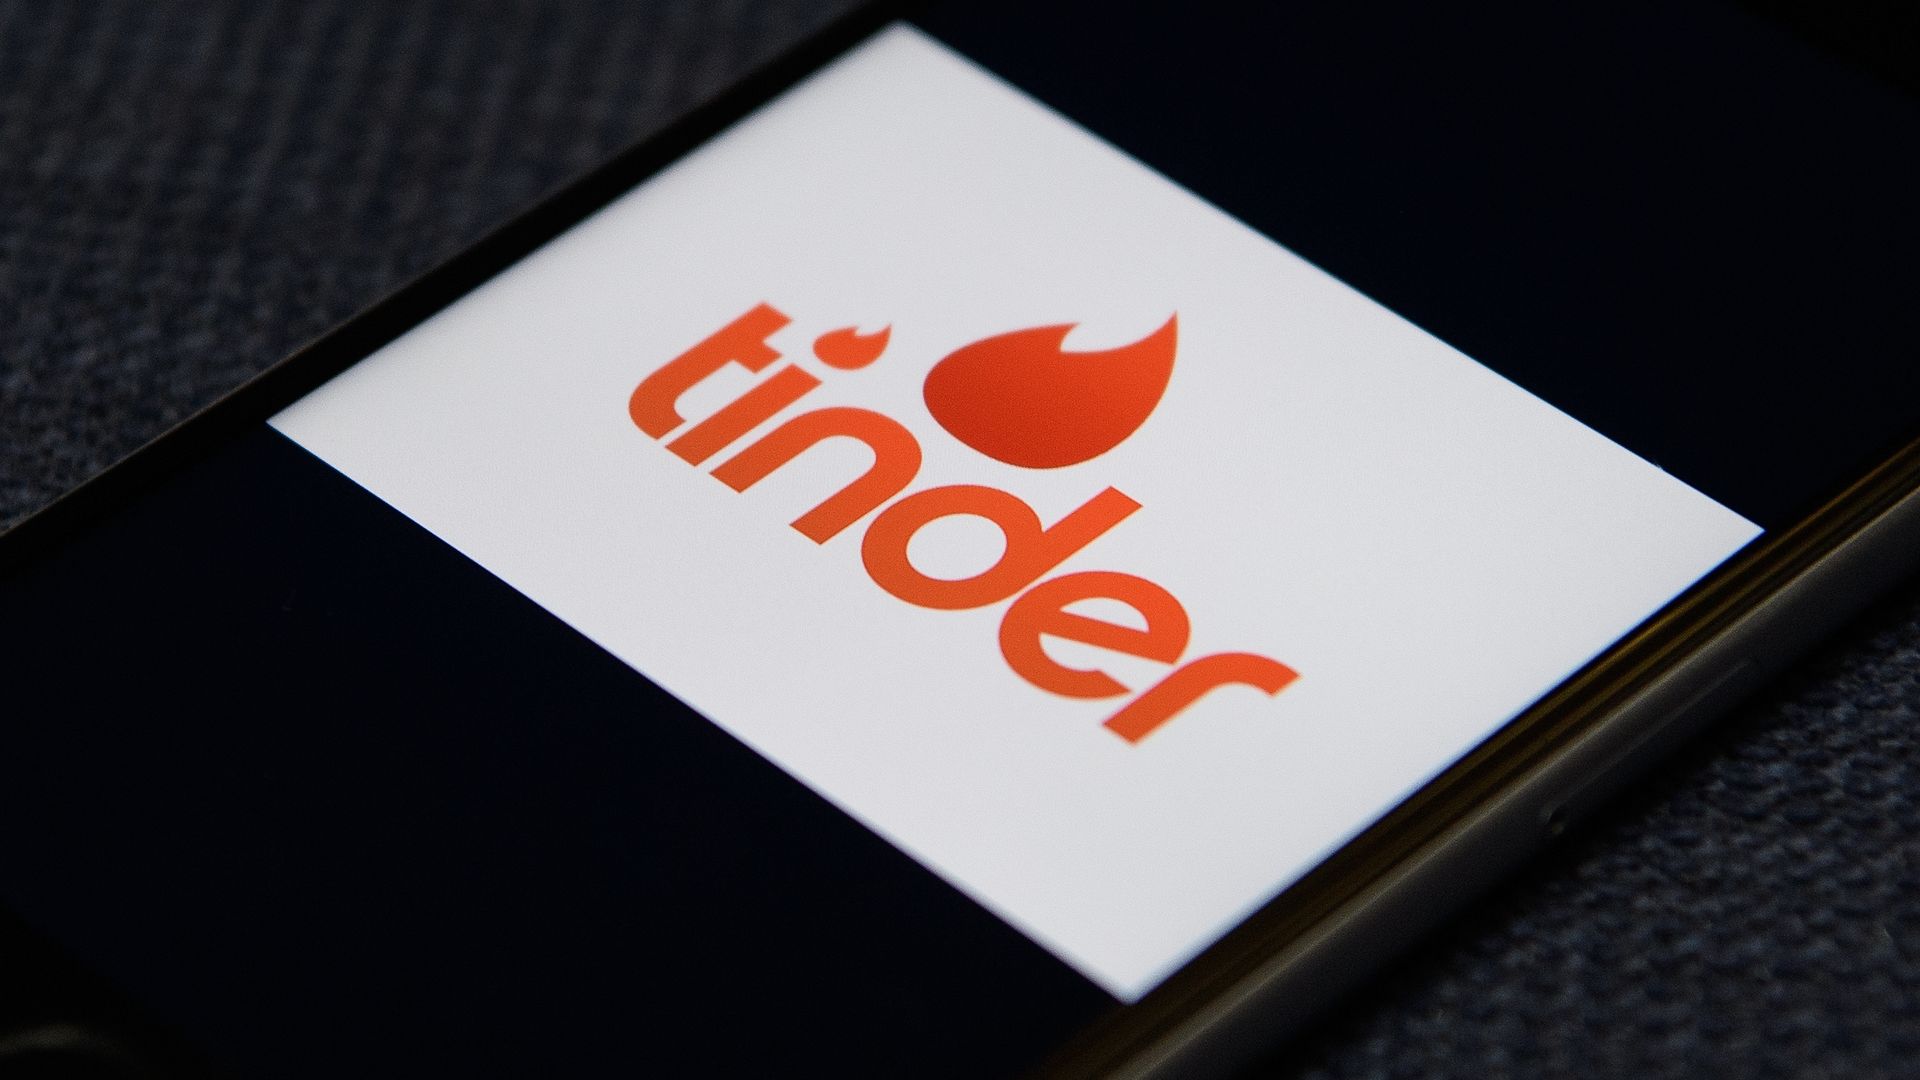 The "Tinder" app logo is seen on a mobile phone screen on November 24, 2016 in London, England. 